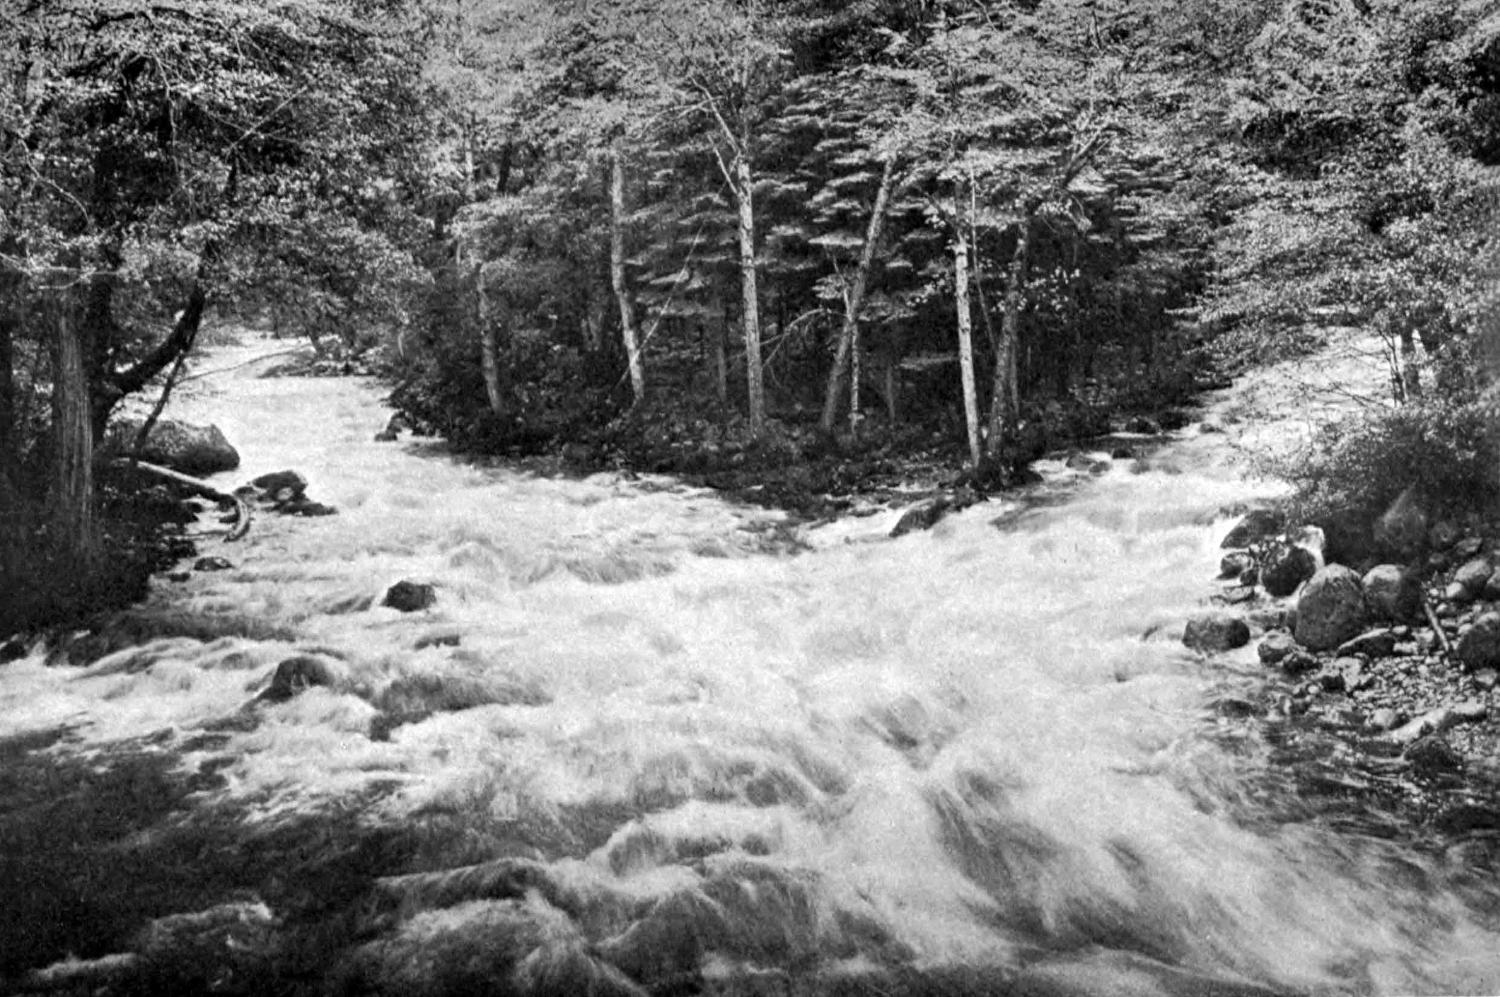 A photograph of a whitewater river rushing around either side of a small island of trees.